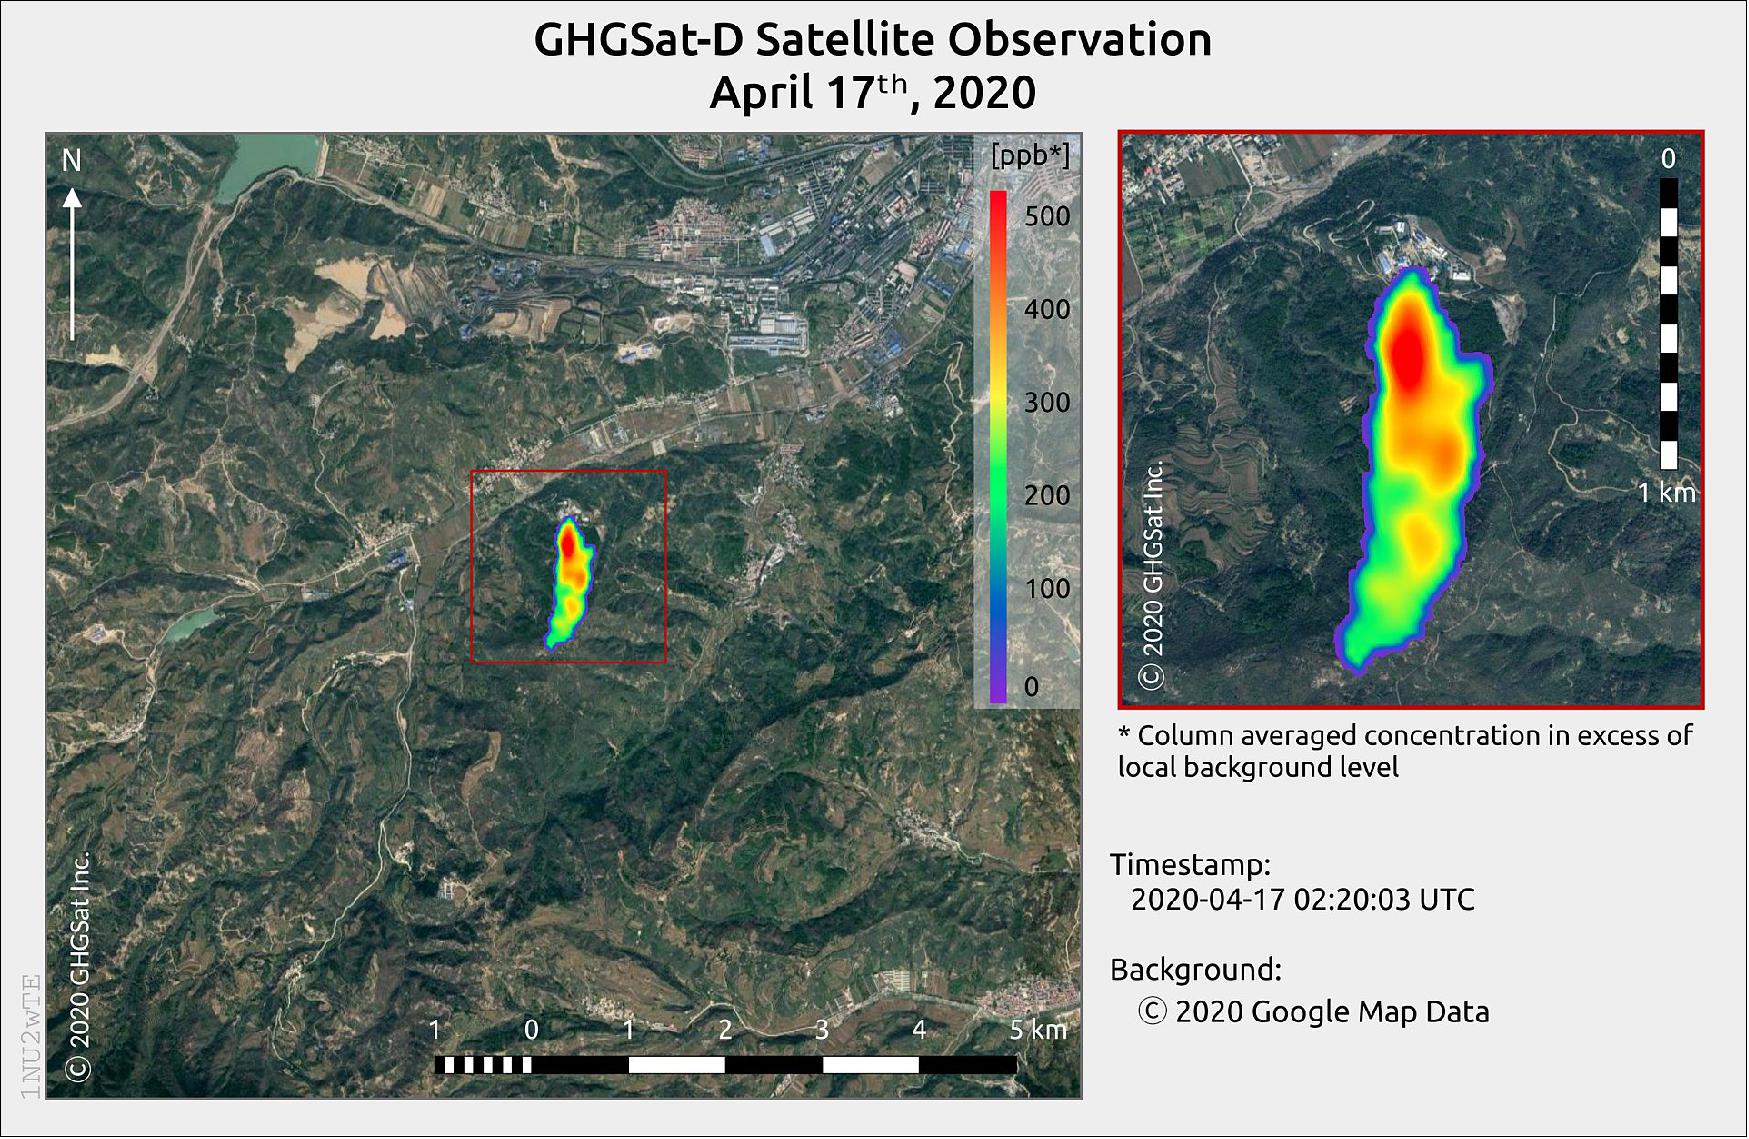 Figure 6: GHGSat methane concentrations over a coal mine in the Shanxi province, China. This image shows GHGSat methane concentrations over a coal mine in the Shanxi province, China (image credit: GHGSat)